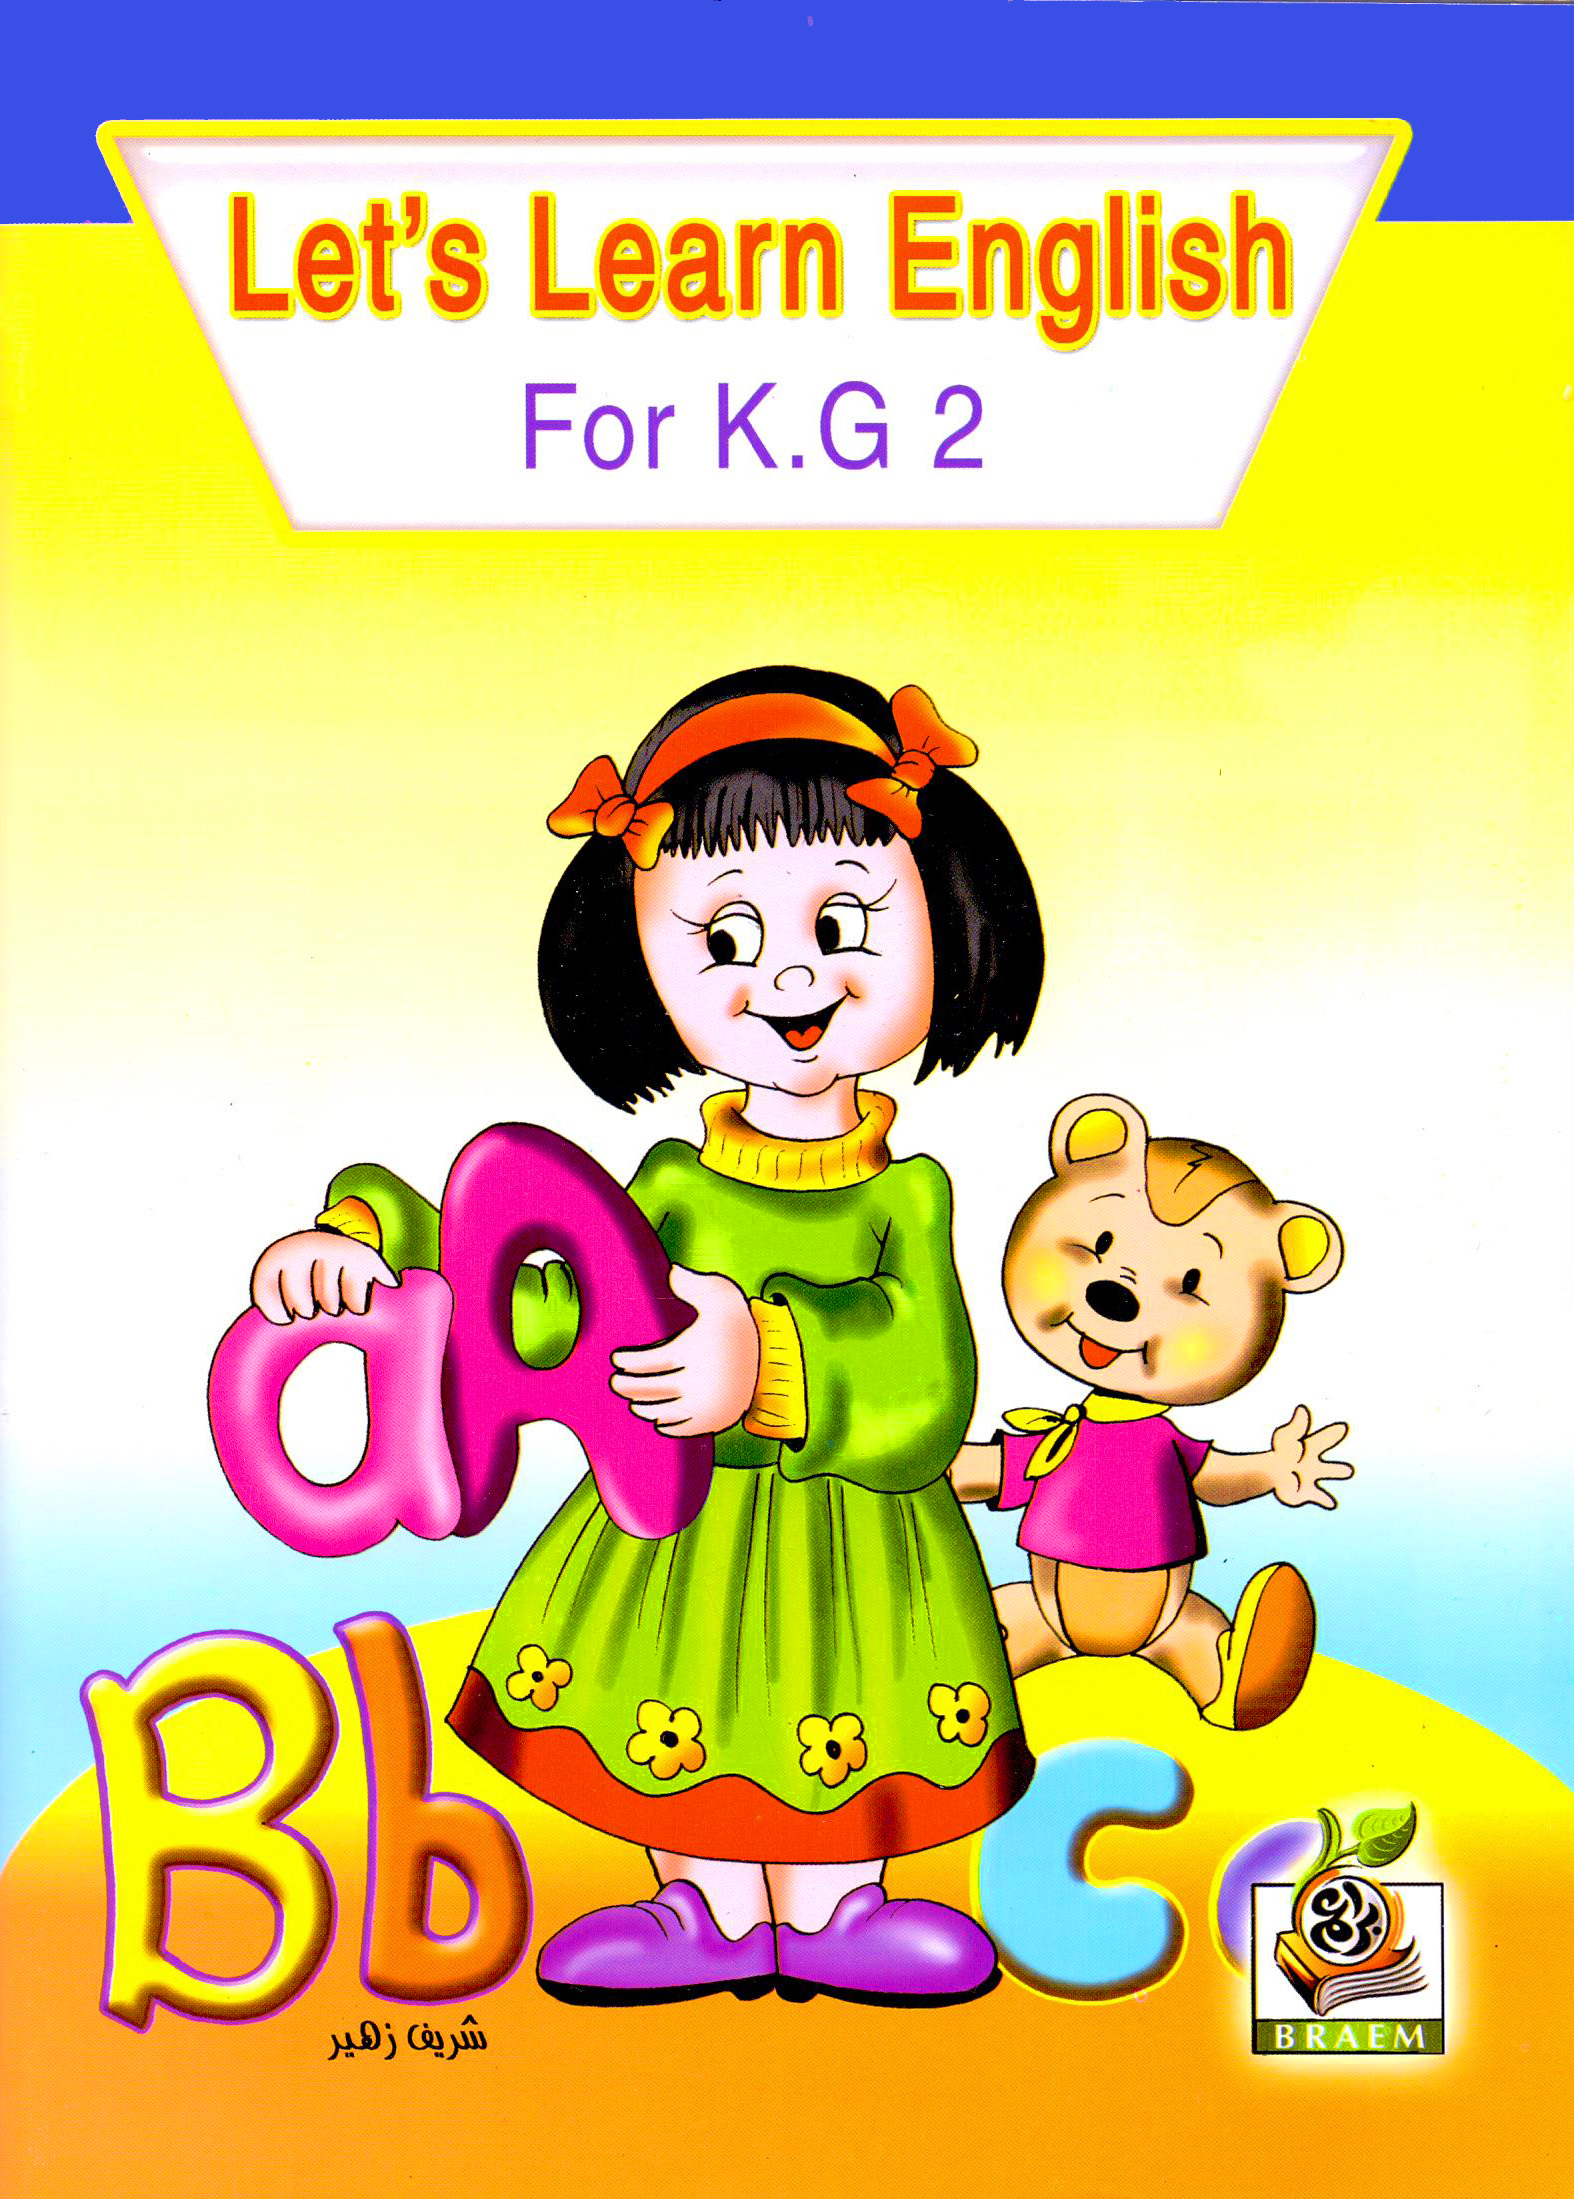 Let's Learn English For K. G 2